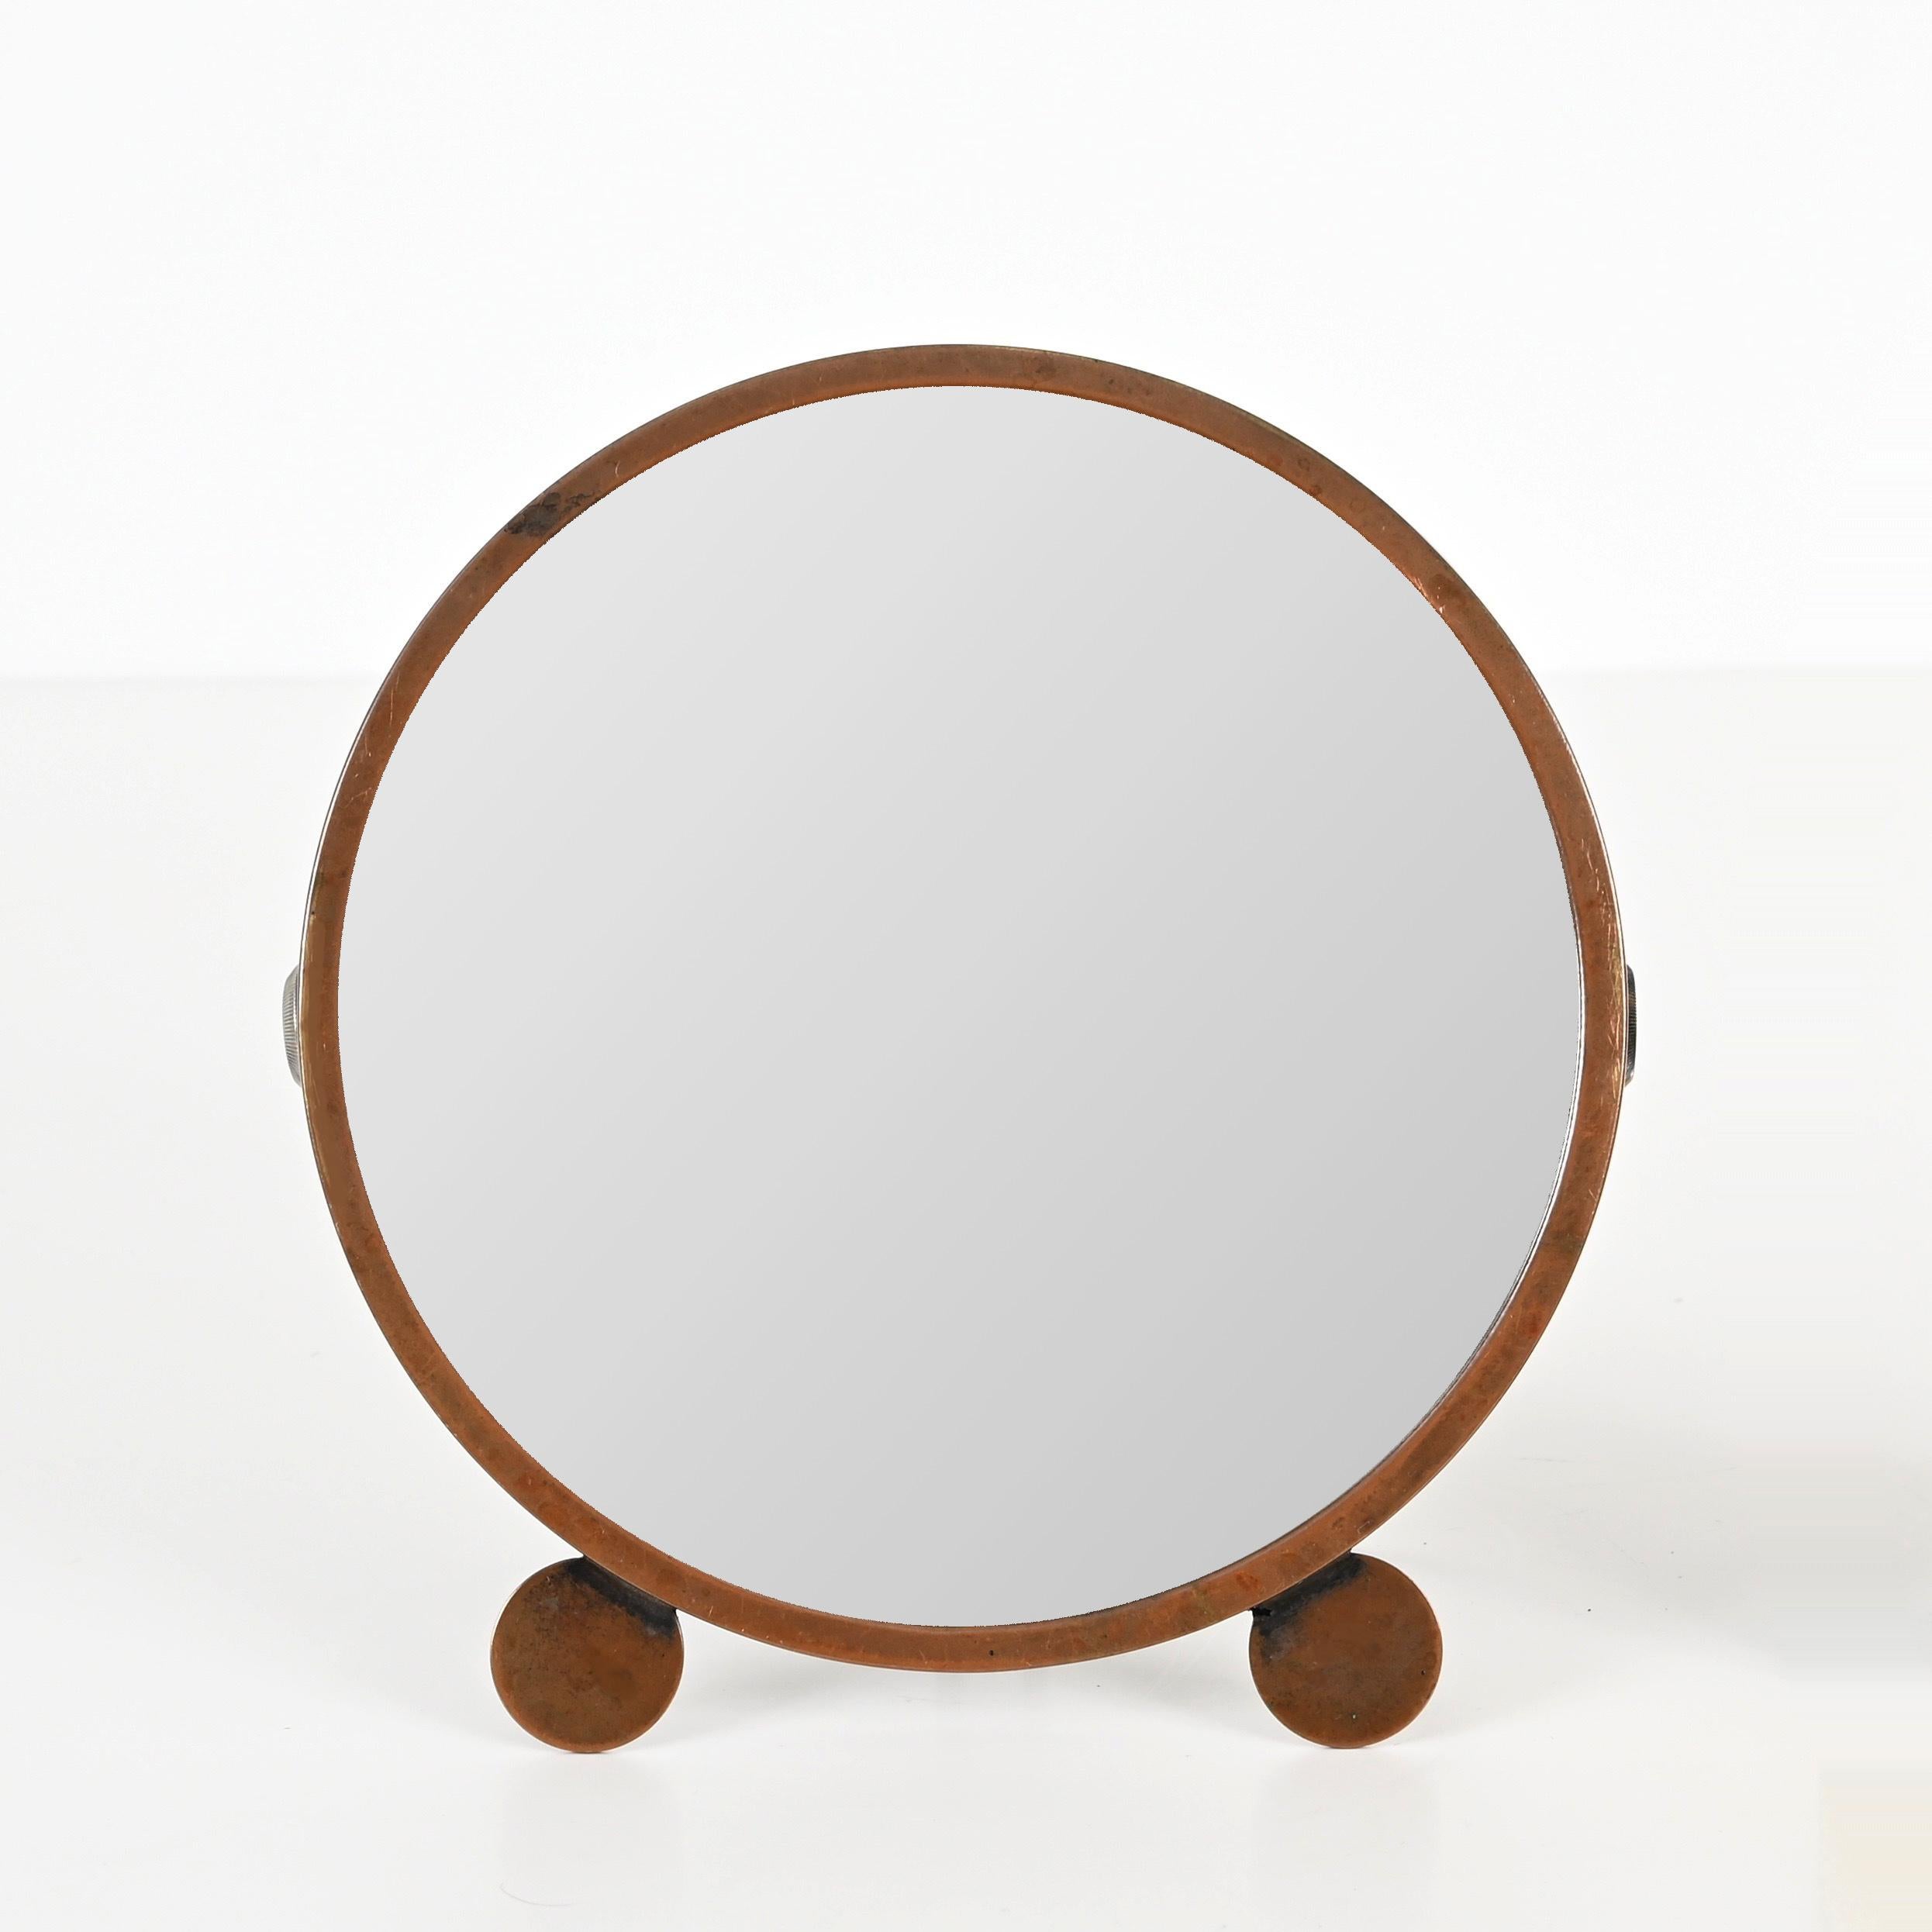 Amazing Art Deco adjustable table mirror in copper. This incredibly charming and unique piece was made in Italy during the 1930s.  

This table mirror has a round frame made in copper with a stunning bronzed even patina which enhances its charm and